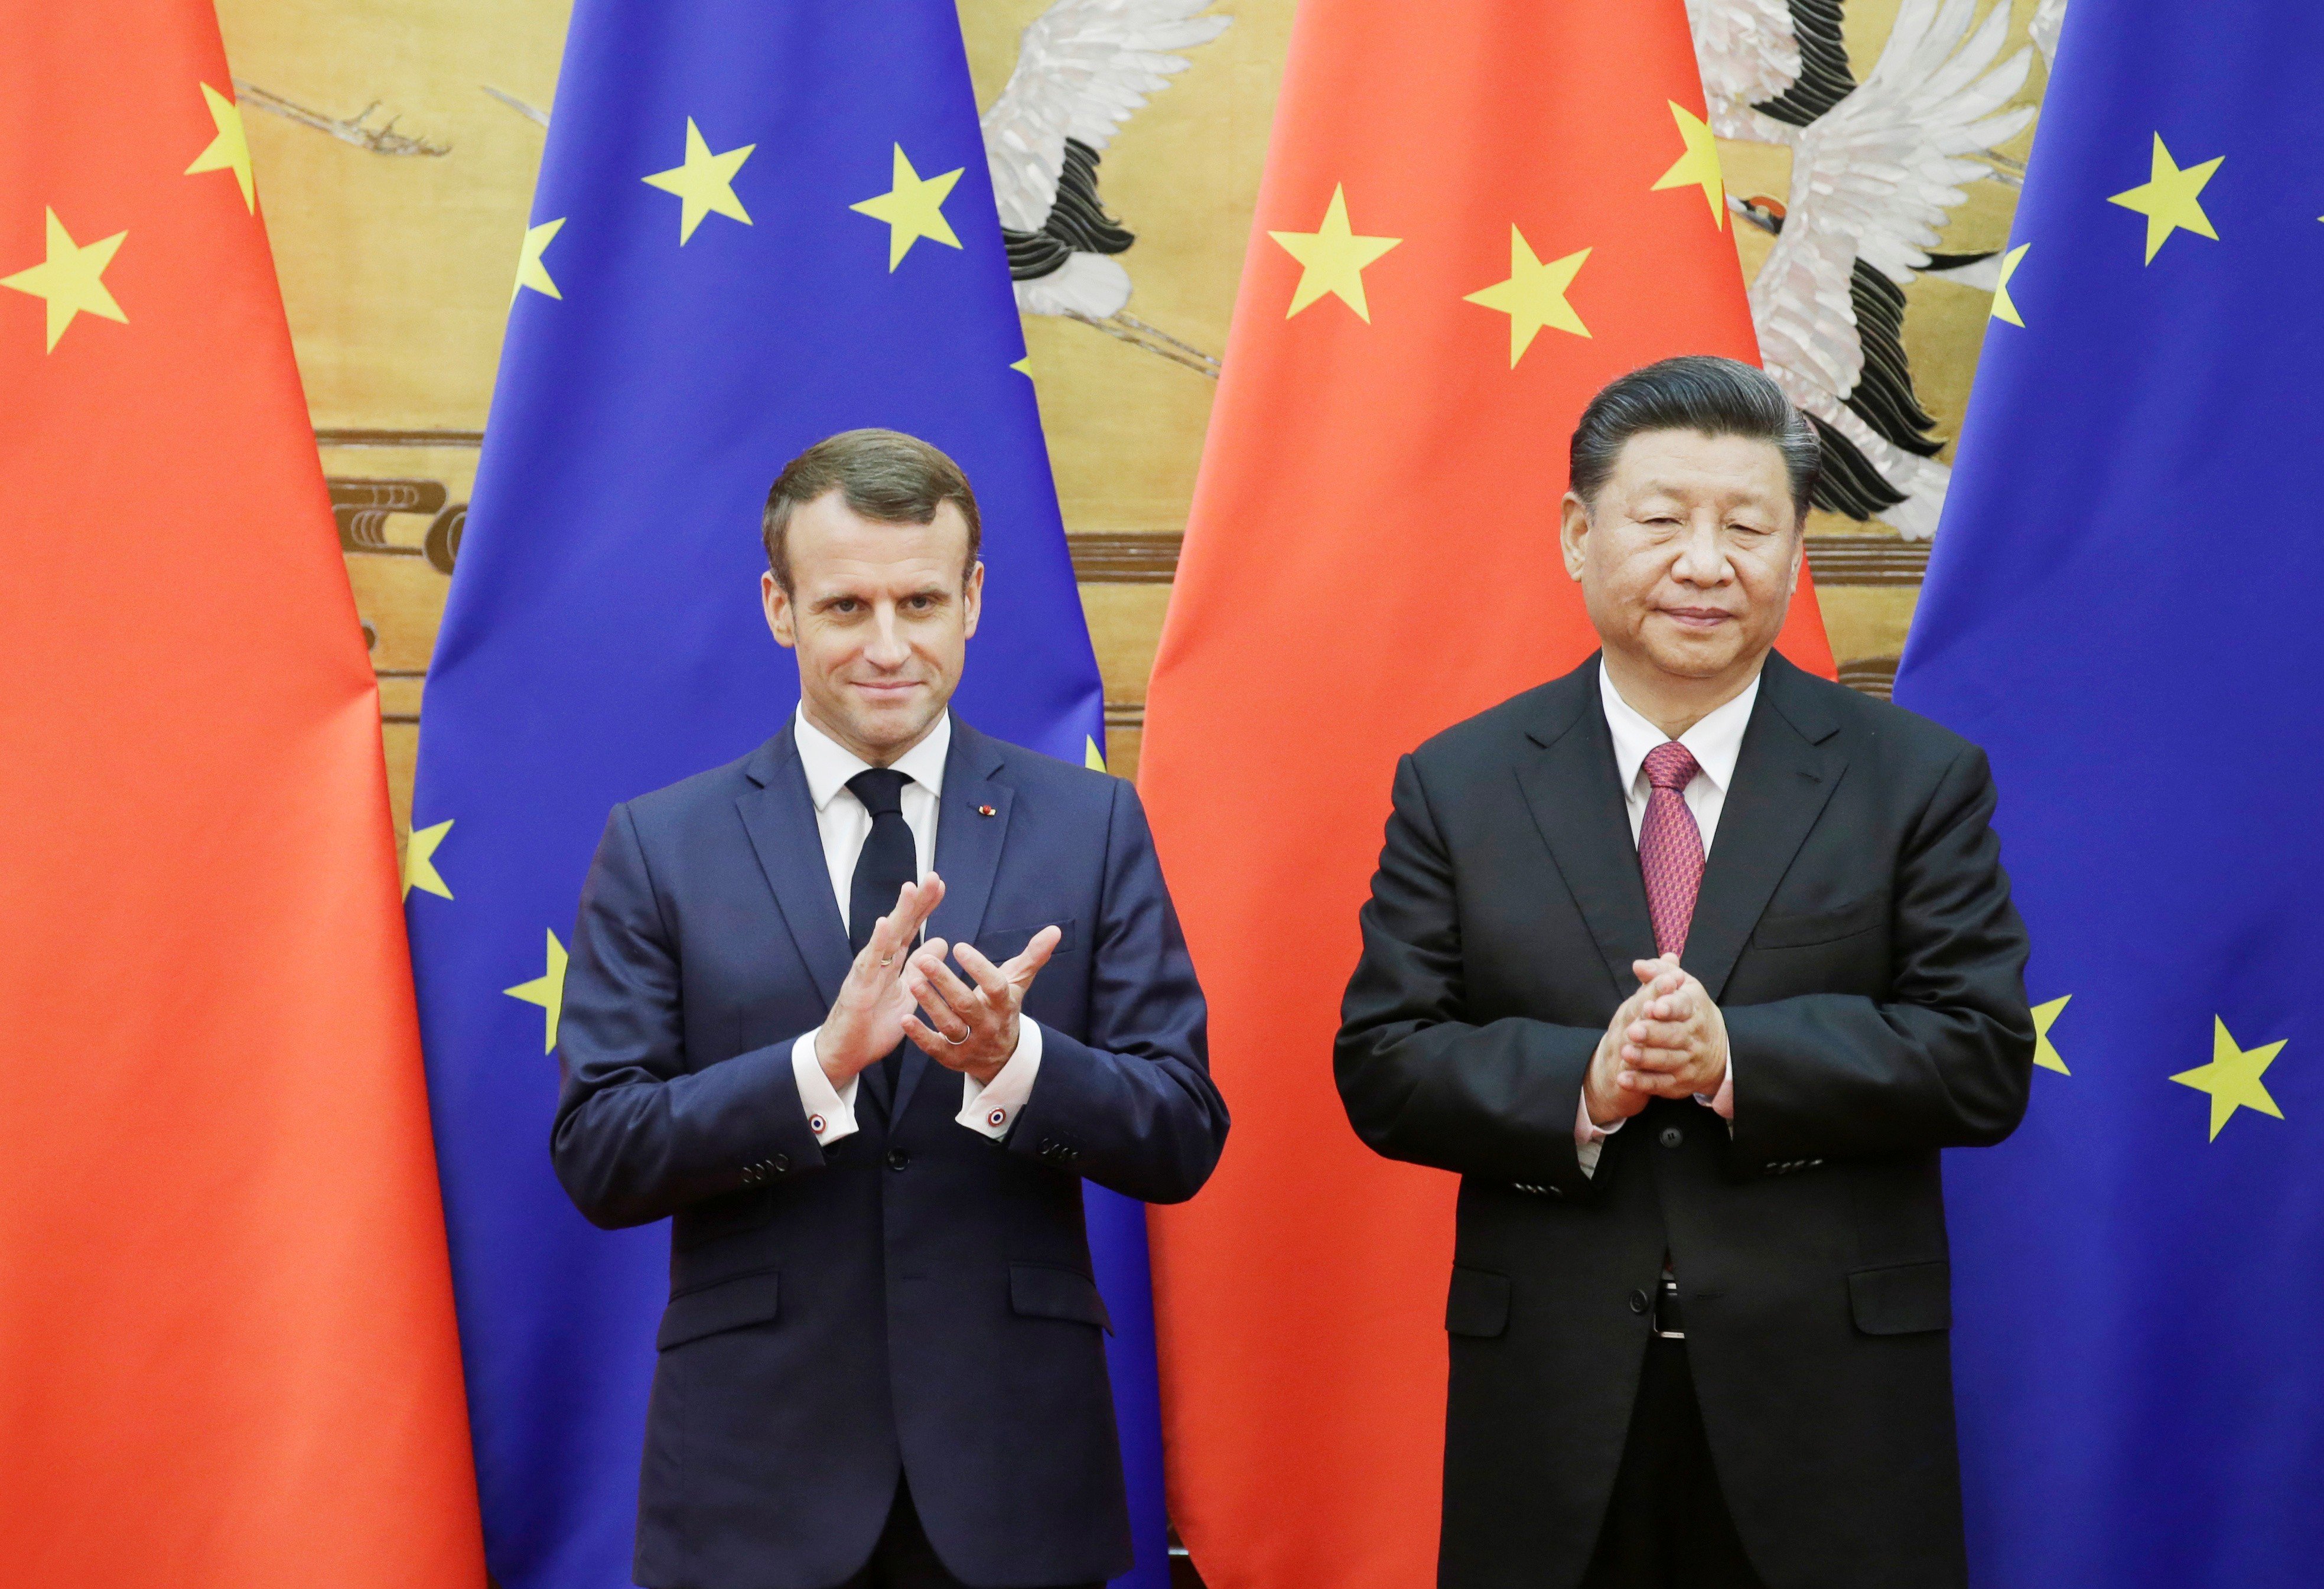 Chinese President Xi Jinping and French President Emmanuel Macron stand in front of Chinese and European Union flags at a signing ceremony in the Great Hall of the People in Beijing on November 6, 2019. Photo: Reuters